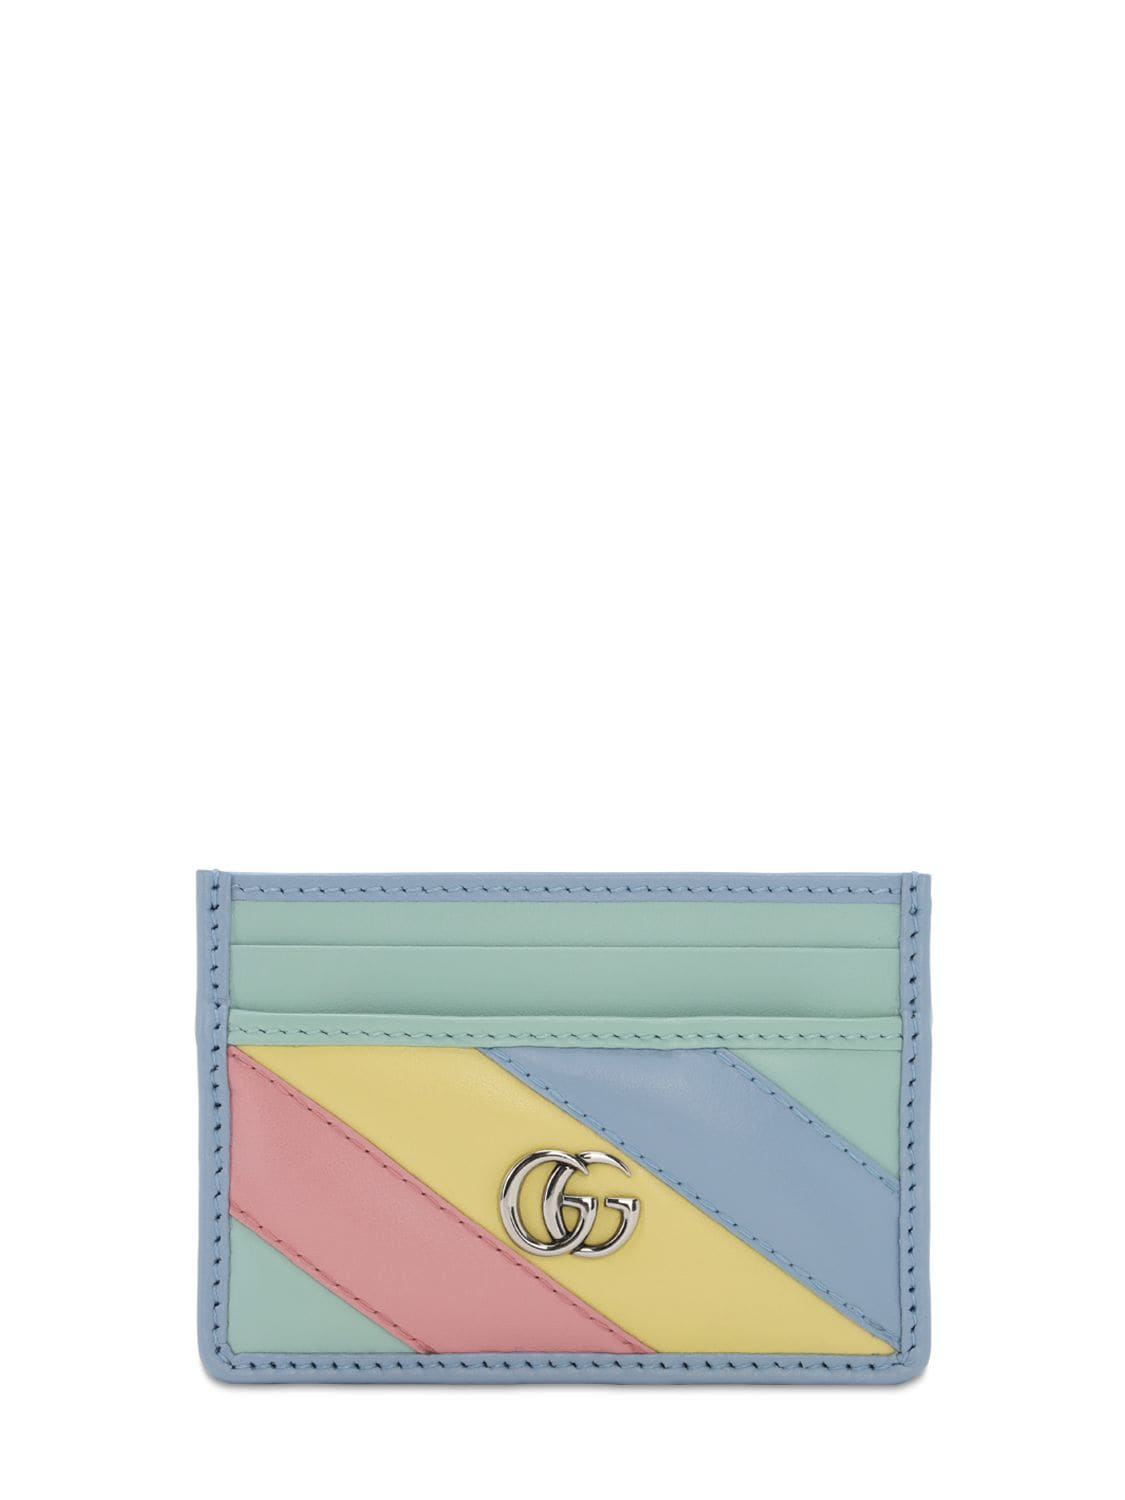 GUCCI GG MARMONT QUILTED LEATHER CARD HOLDER,72IIJS036-MZK2NW2